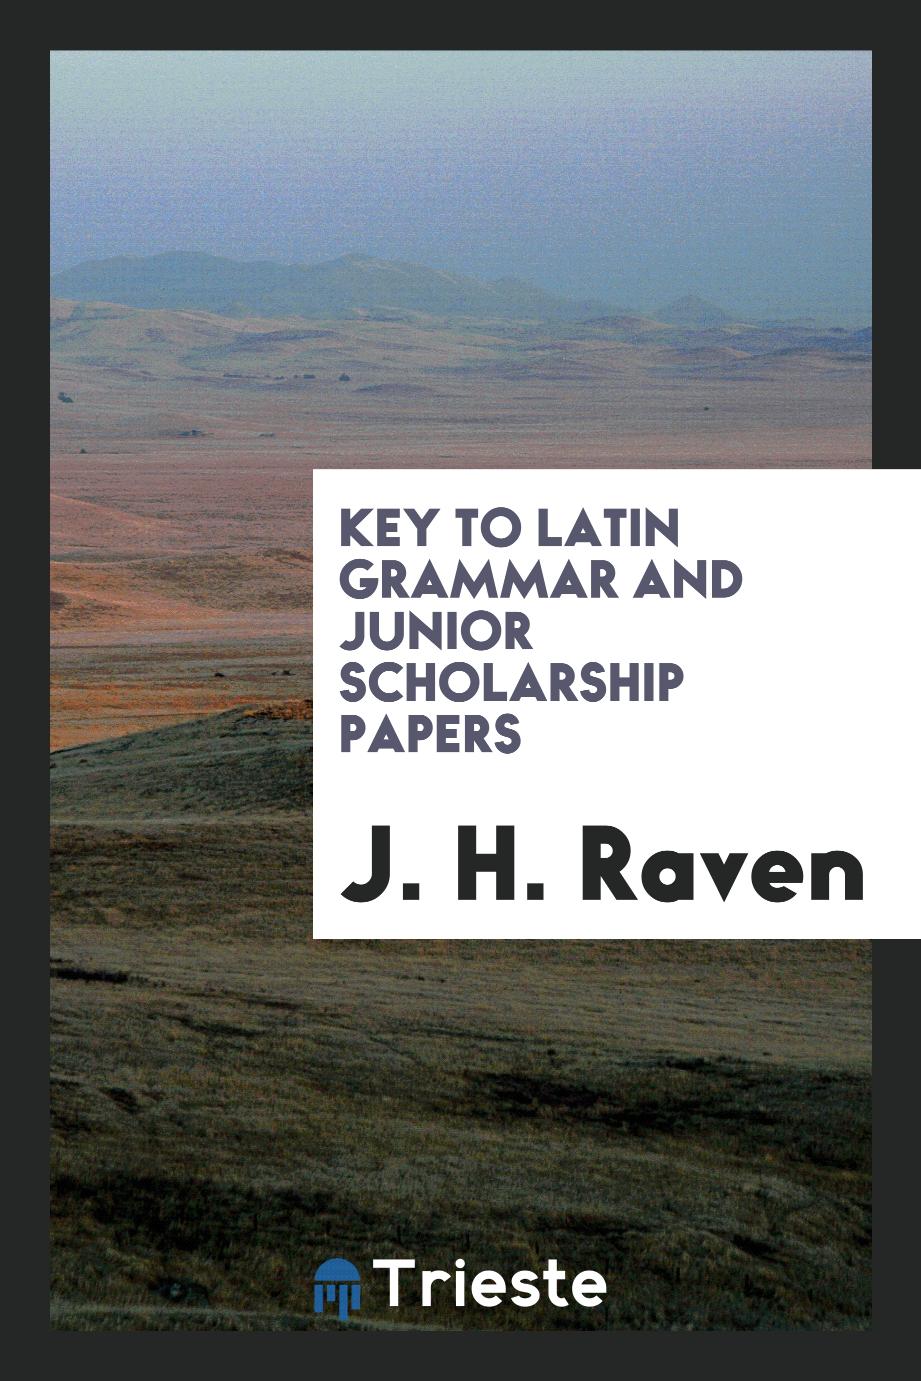 Key to Latin Grammar and Junior Scholarship Papers